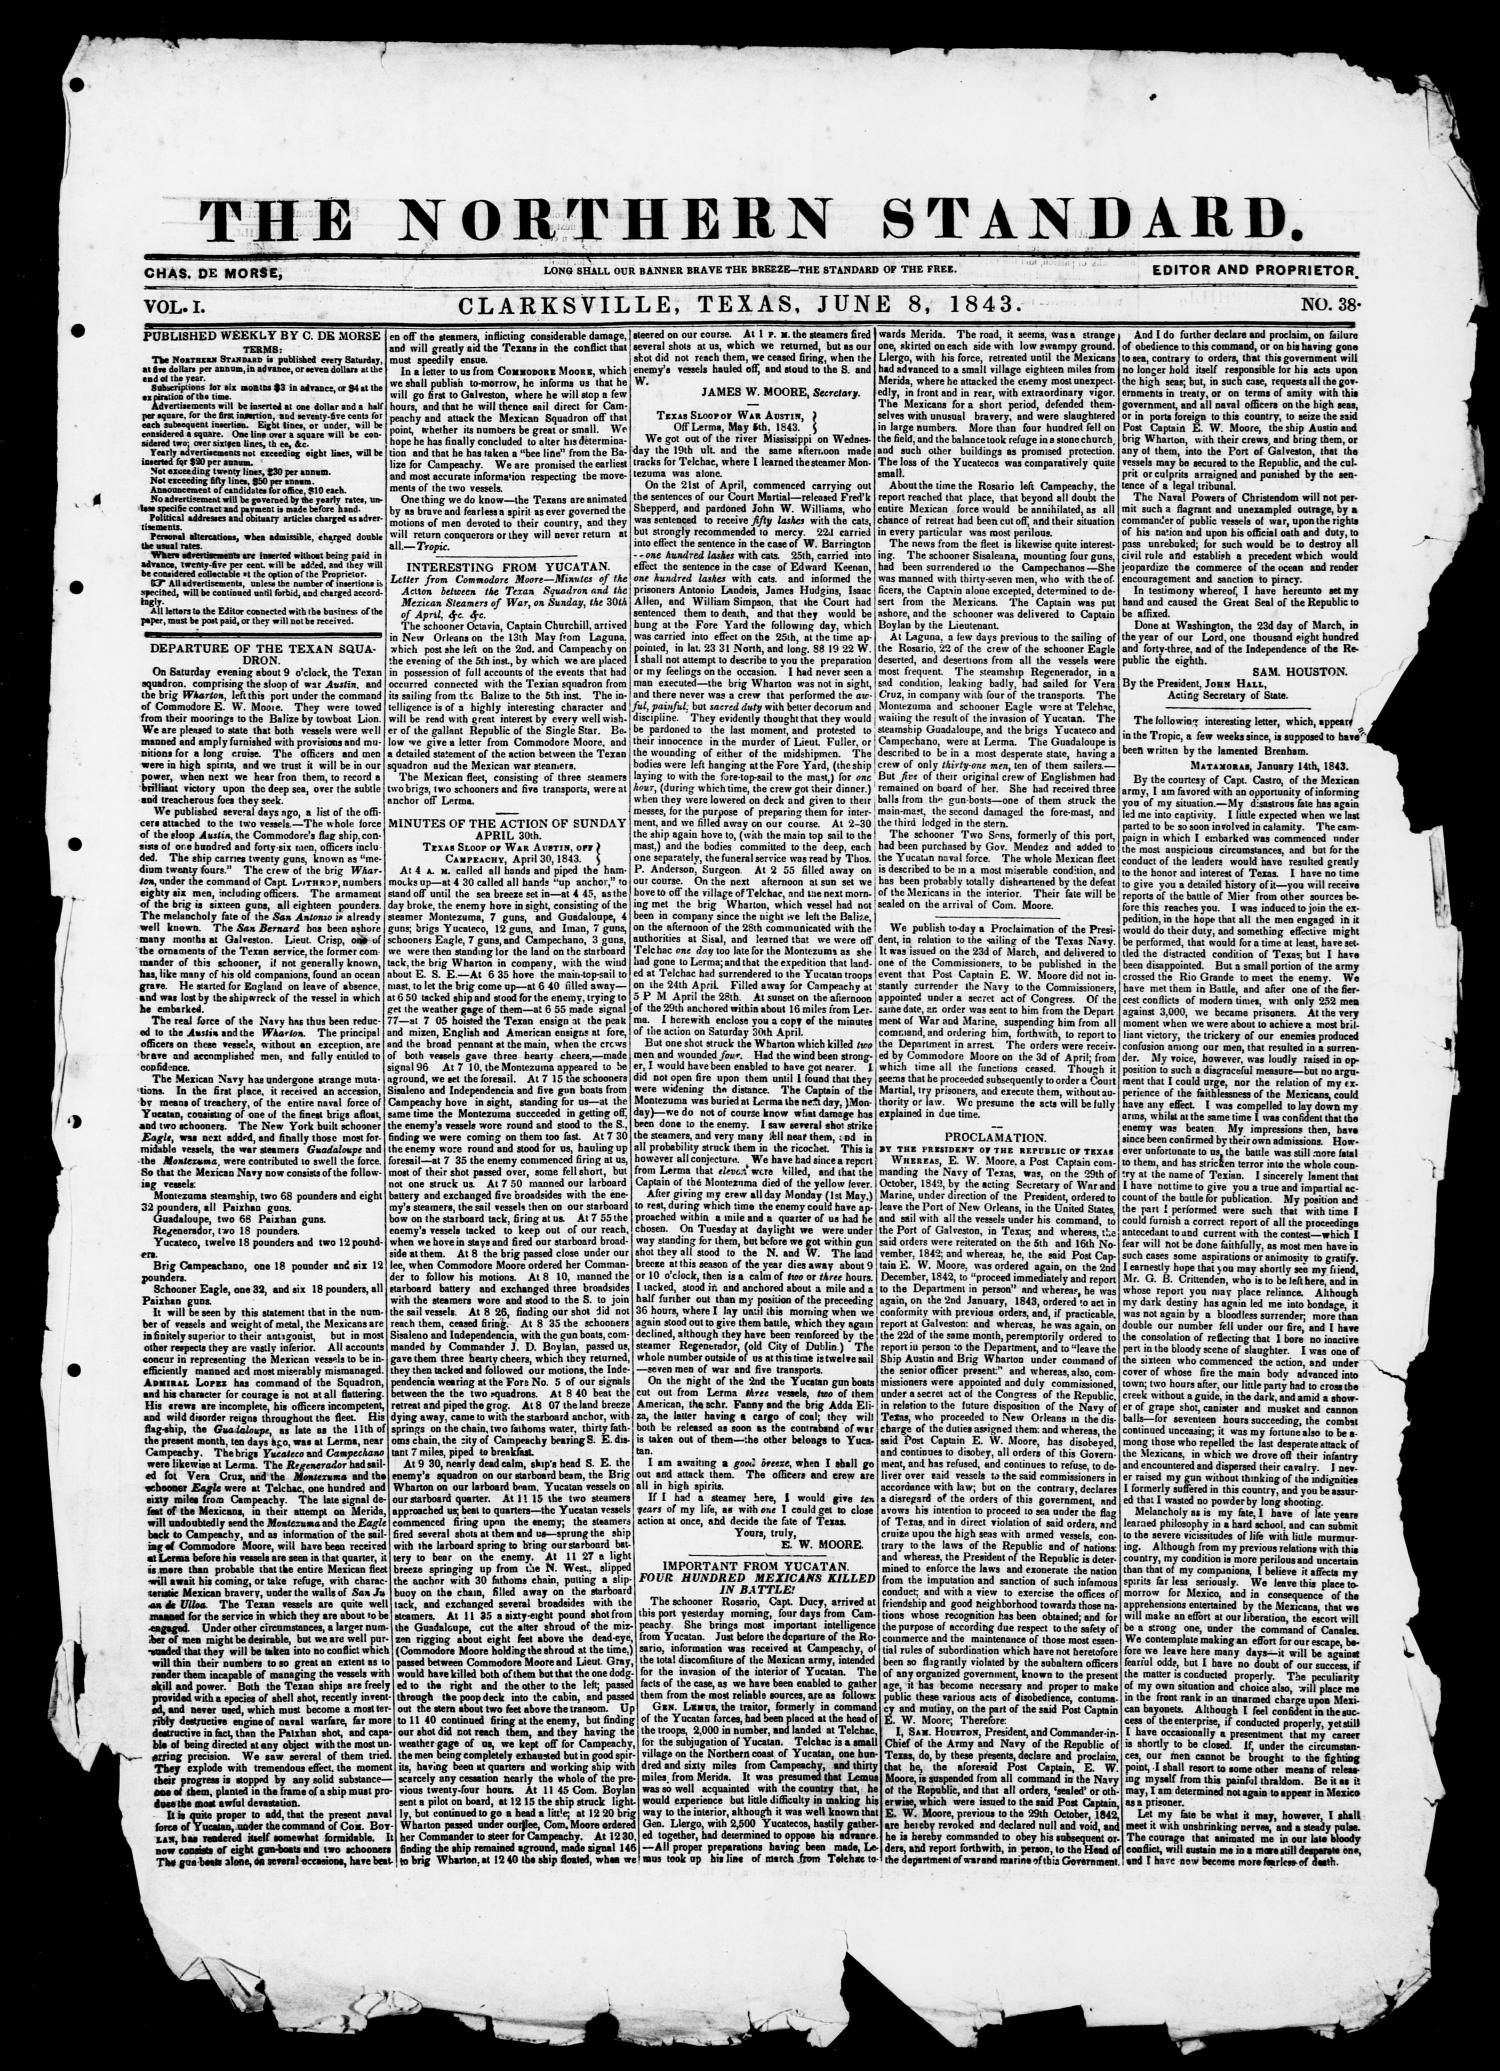 The Northern Standard. (Clarksville, Tex.), Vol. 1, No. 38, Ed. 1, Thursday, June 8, 1843
                                                
                                                    [Sequence #]: 1 of 2
                                                